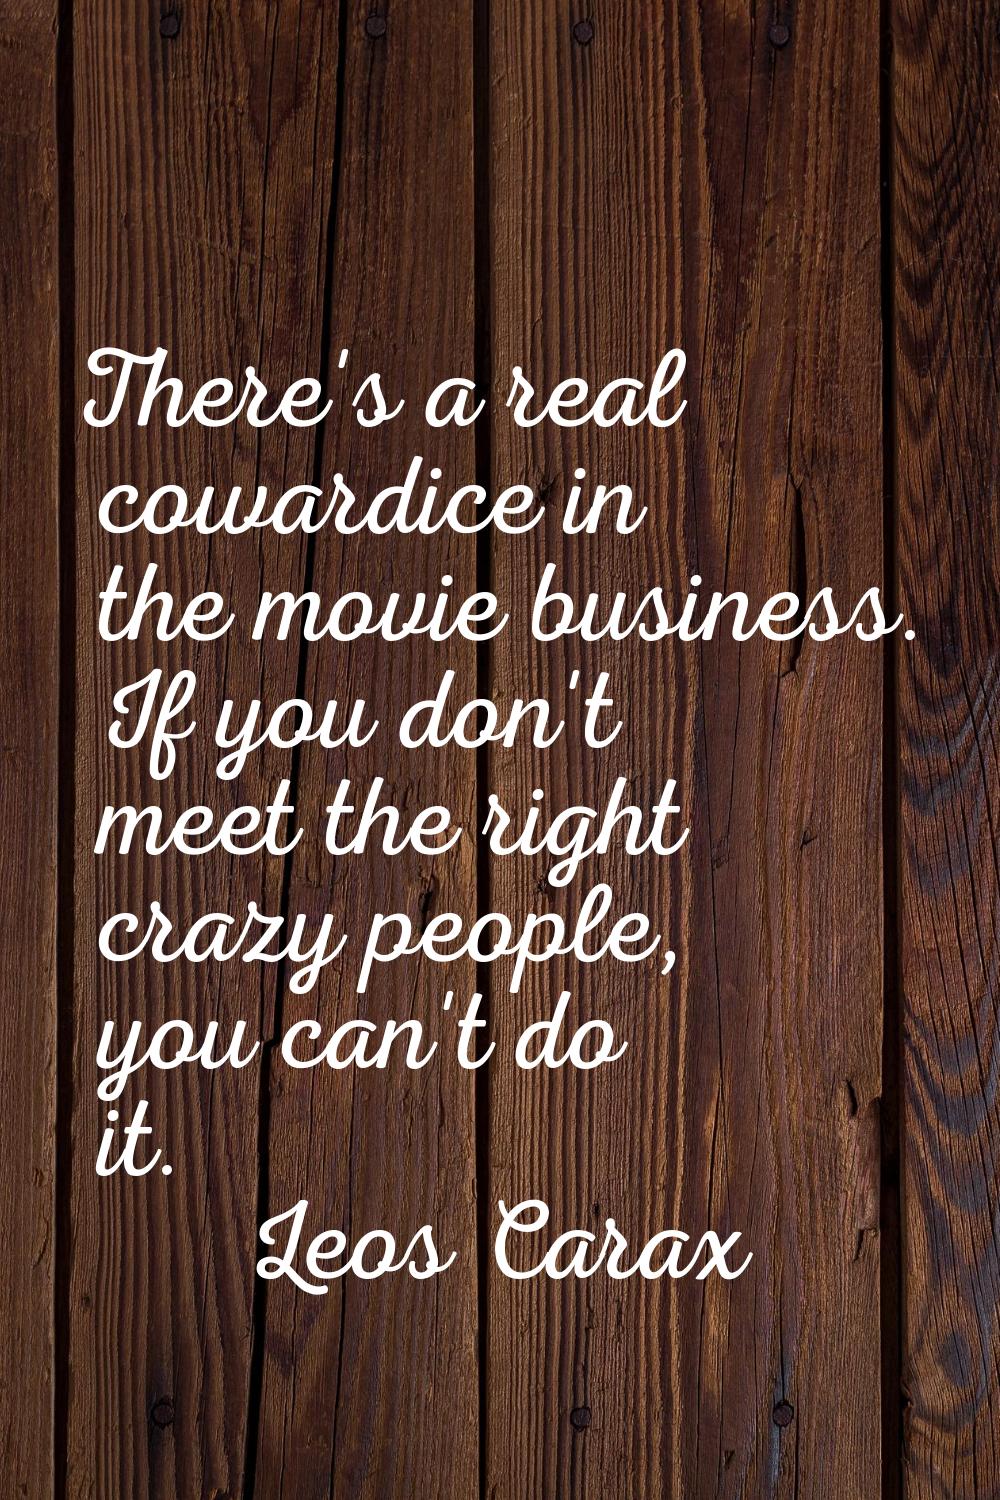 There's a real cowardice in the movie business. If you don't meet the right crazy people, you can't